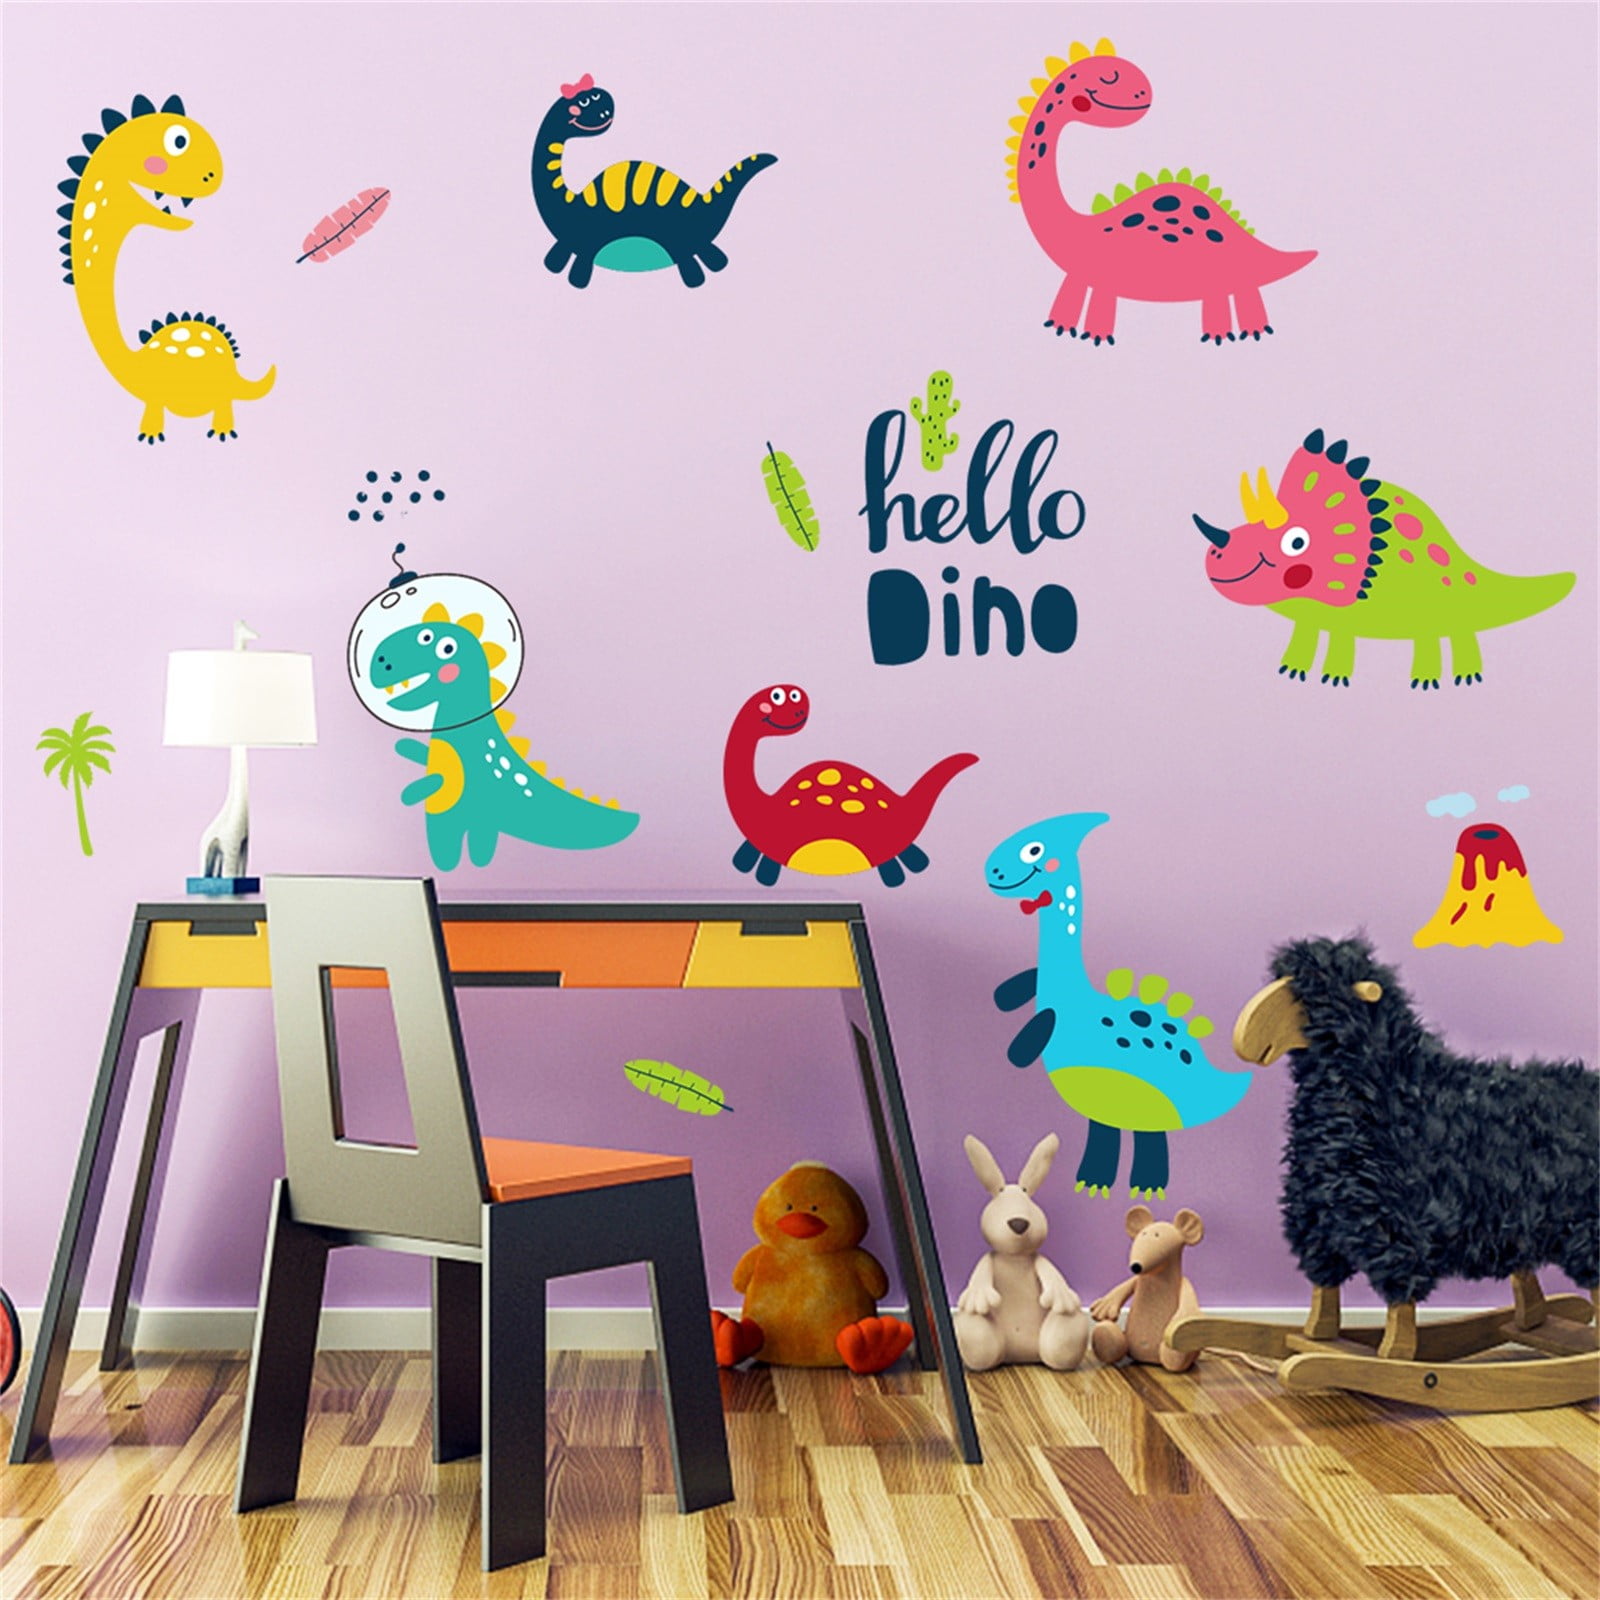 HUOXIG Dinosaur Wall Decals for Kids Bedroom Living Room Teen Boys and Girls Bedroom Animal Wall Decal Stickers Nursery Decor Cartoon Animal Adhesive PVC Wall Decal Home Decorations 